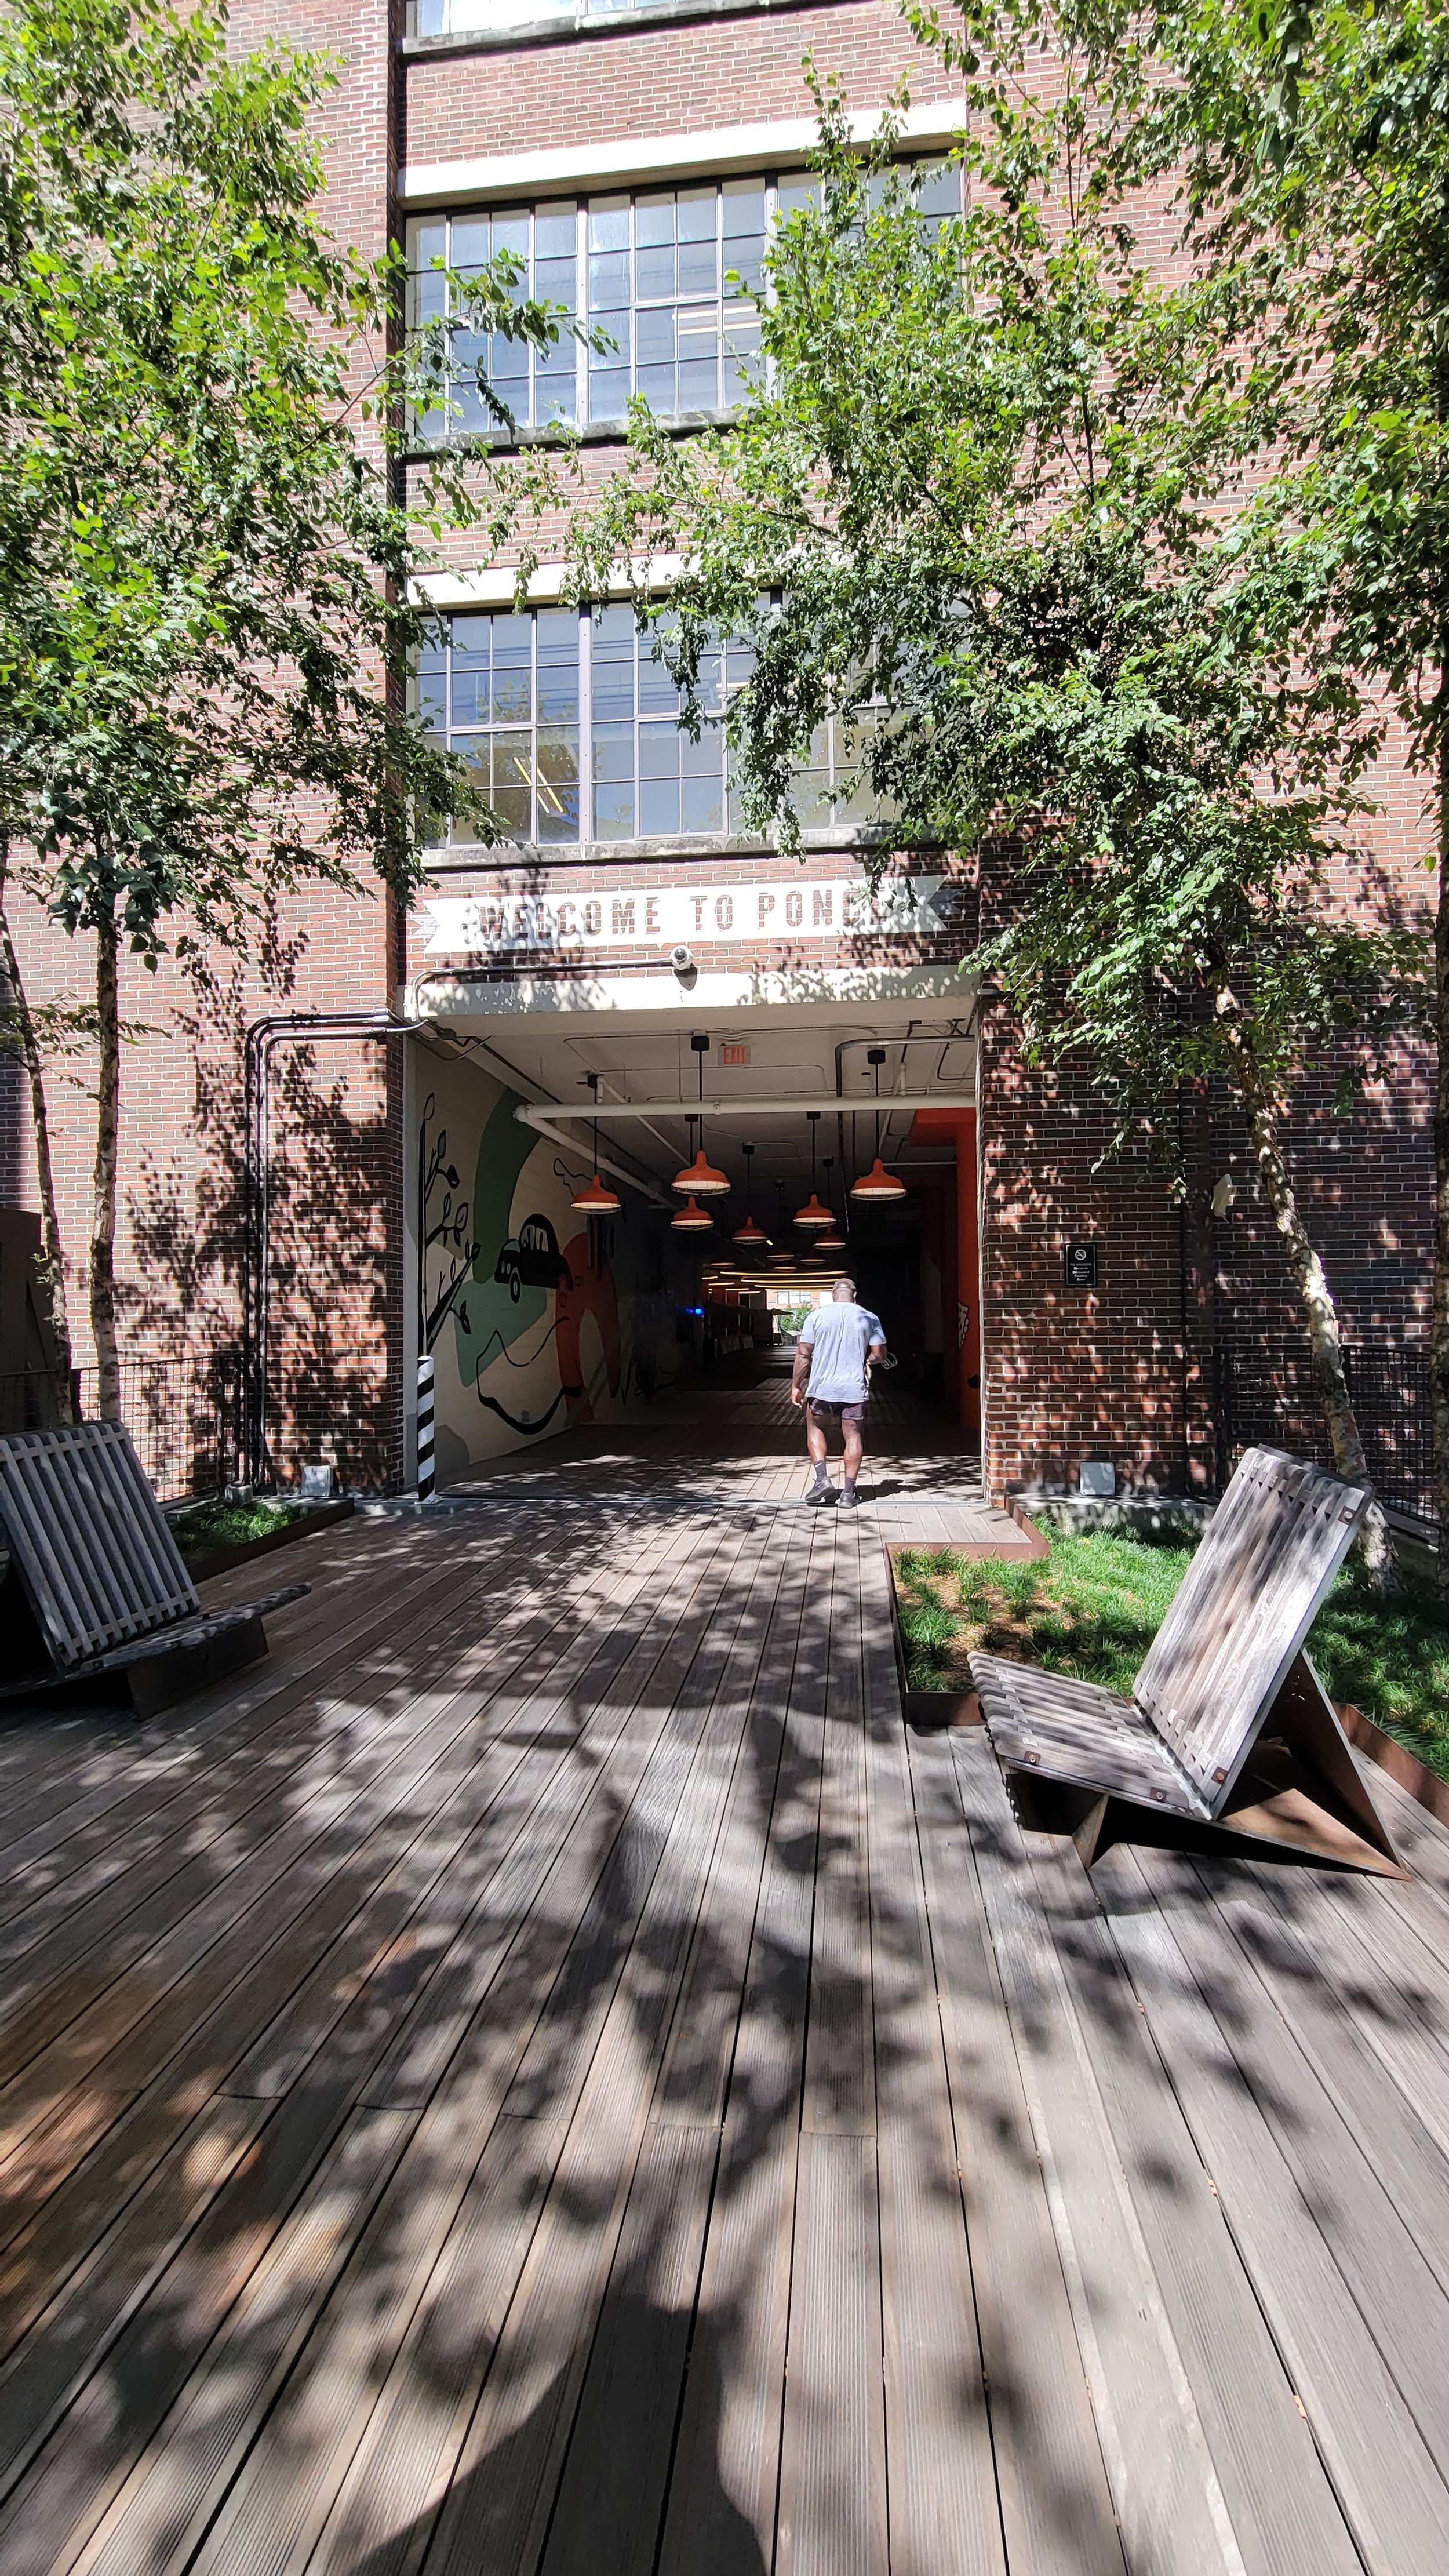  One of several entrances into Ponce City Market 